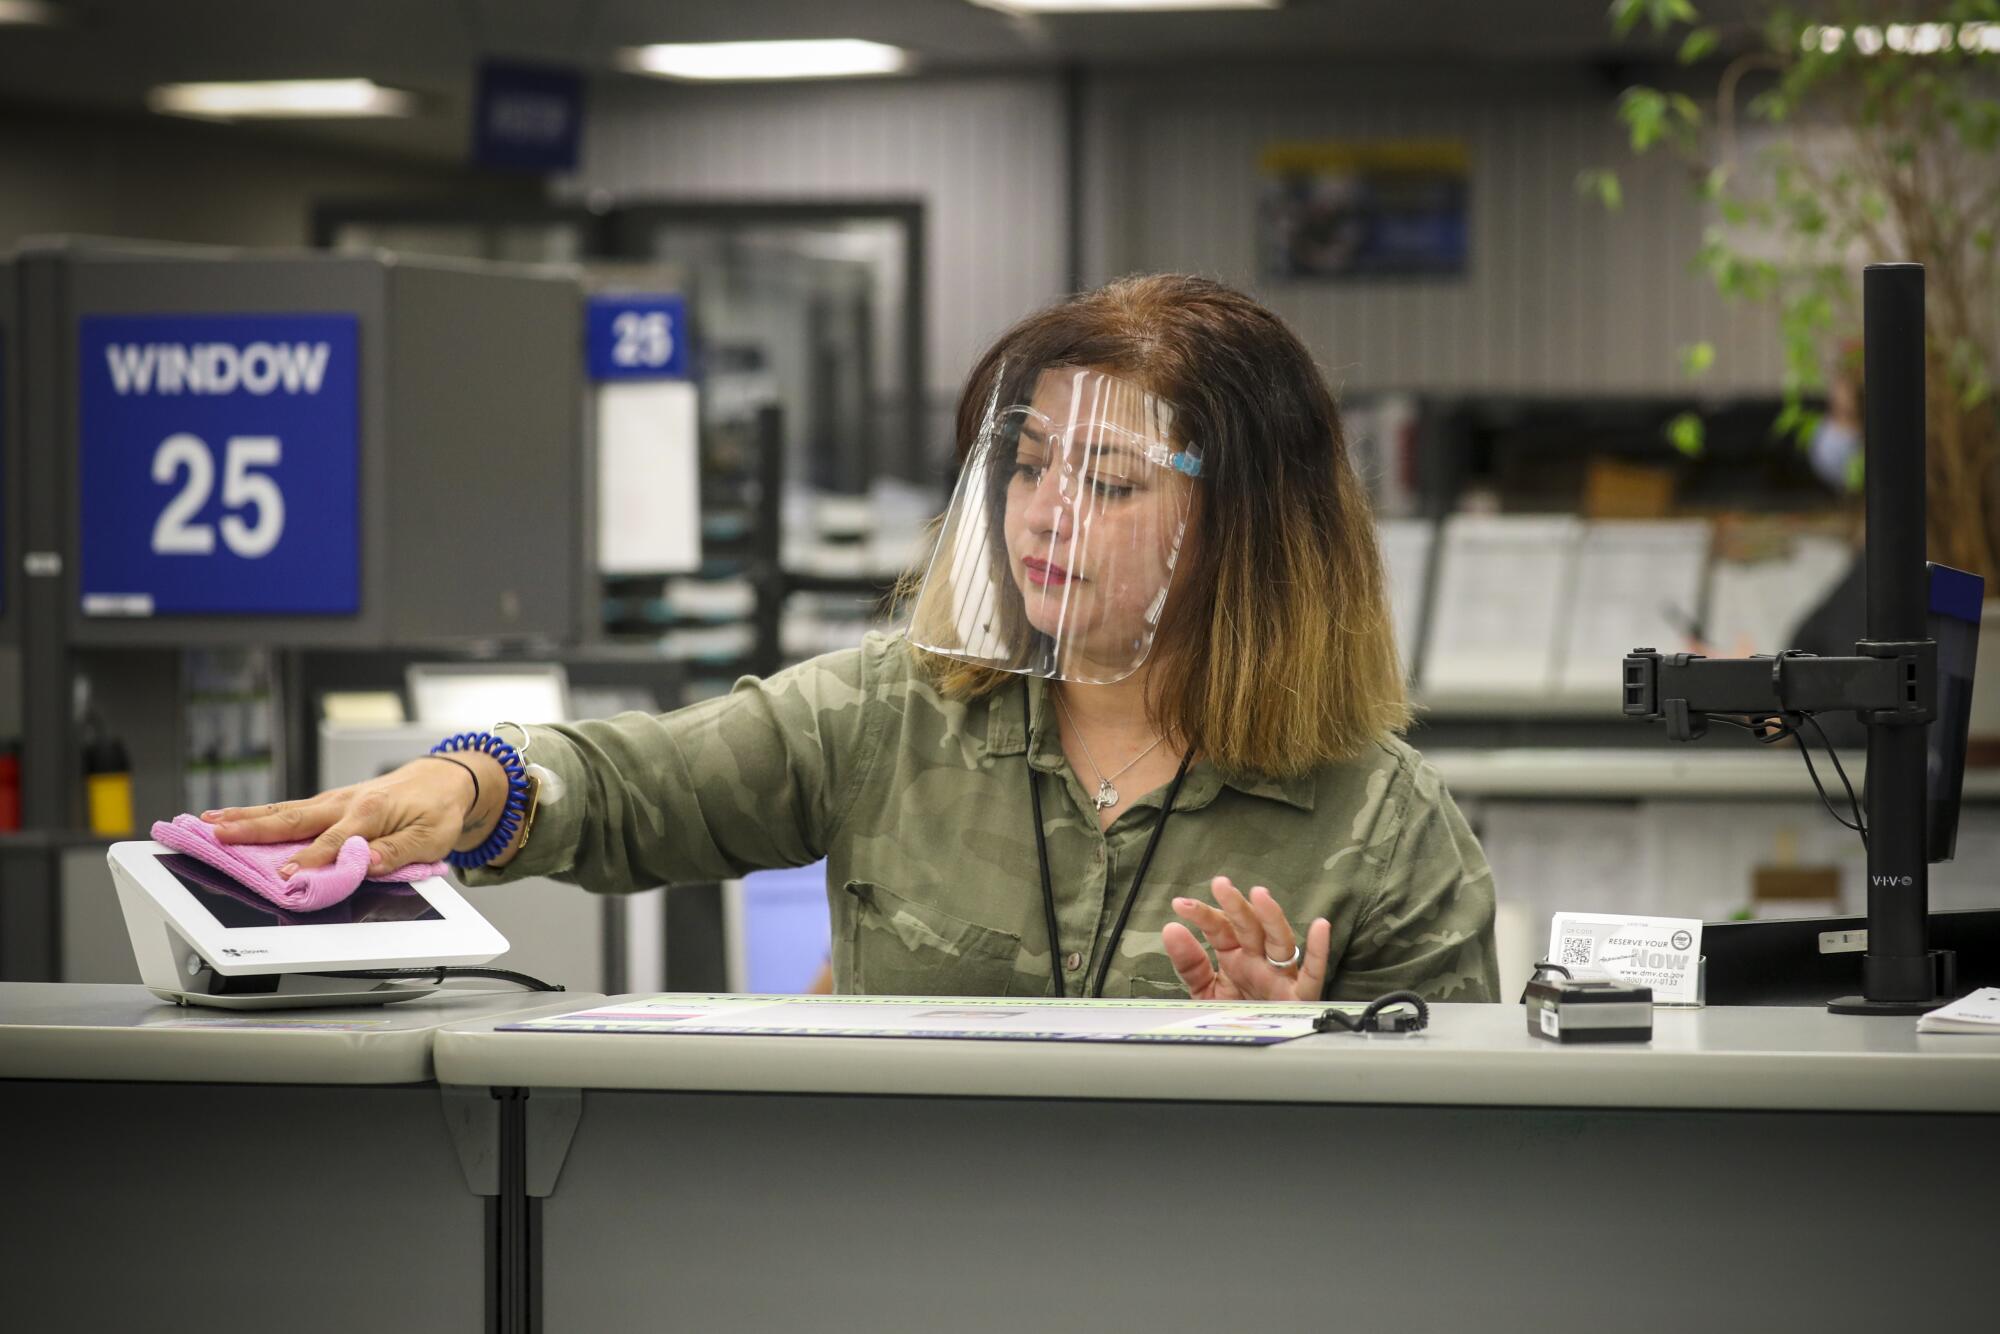 A DMV worker wearing a transparent plastic face shield wipes down an electronic terminal at her workstation